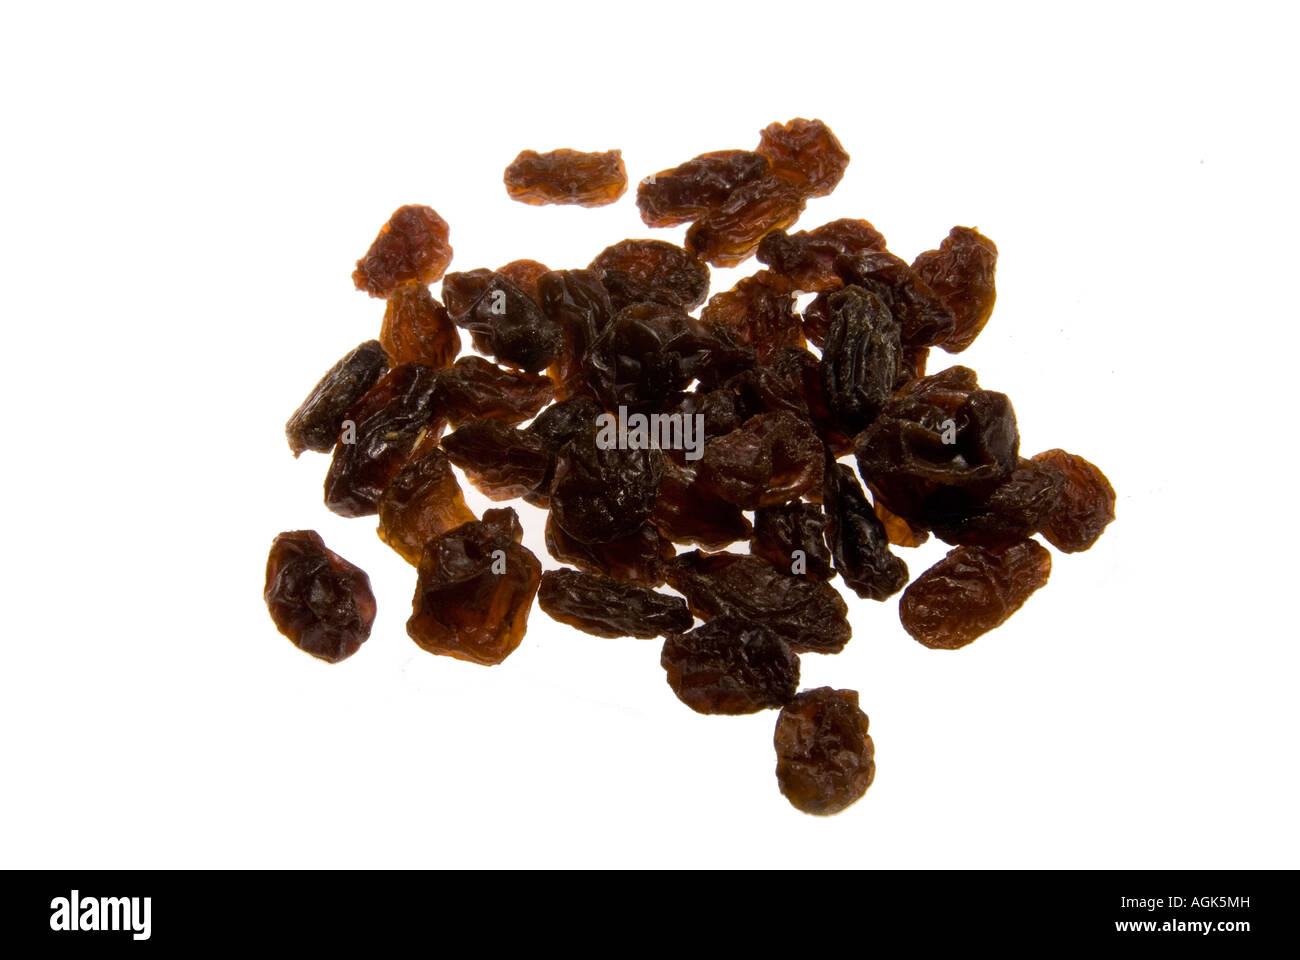 A Cut Out image of a pile of Raisins Stock Photo